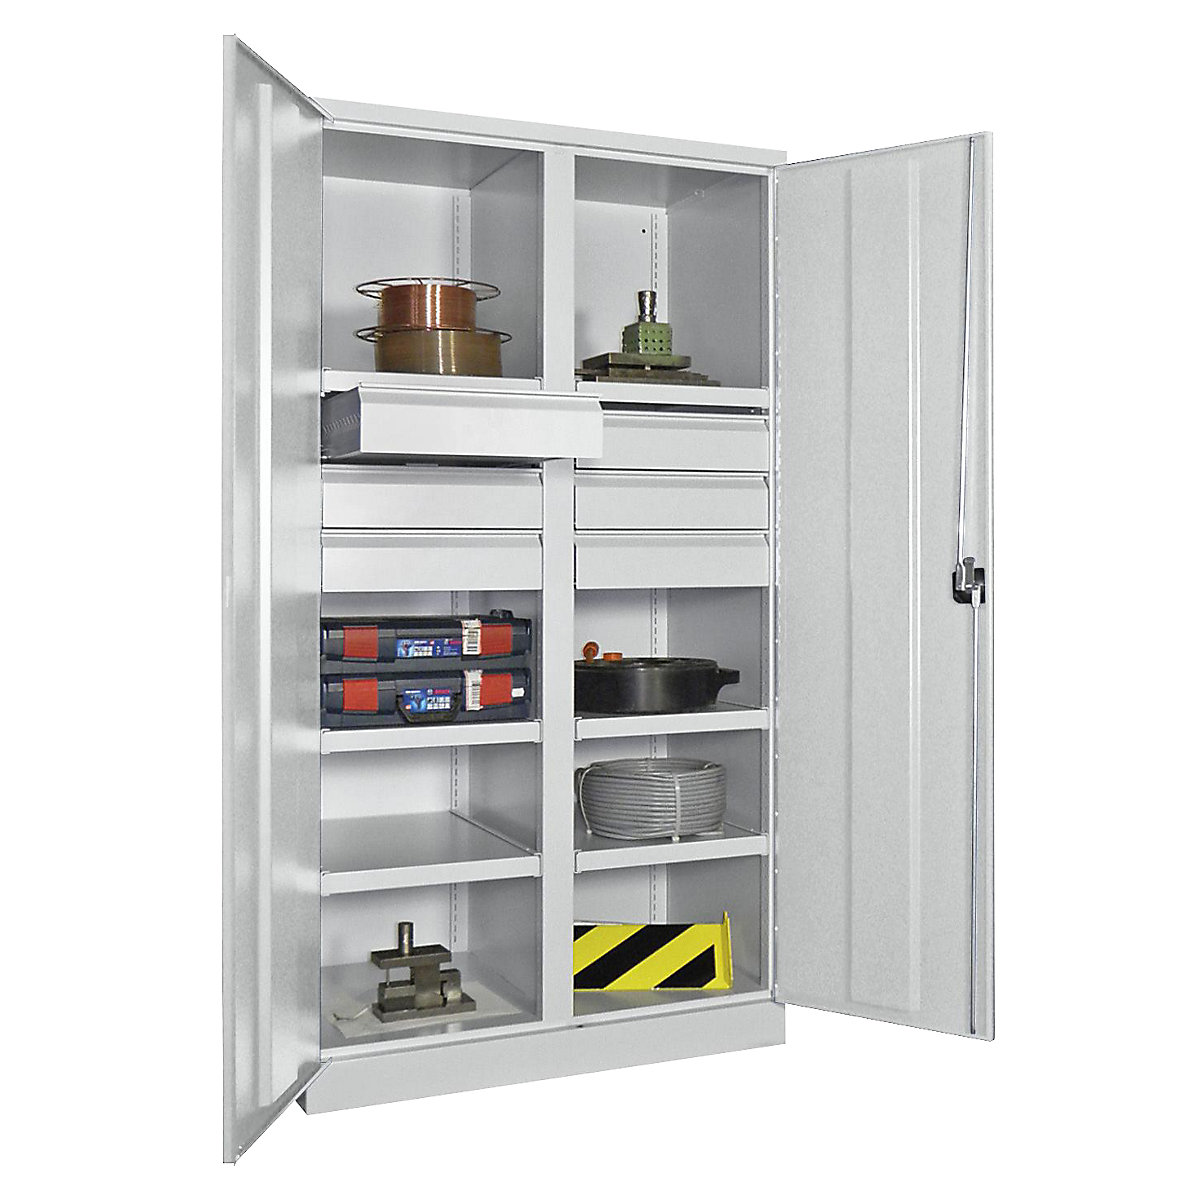 Heavy duty cupboard, height 1950 mm – Pavoy, 6 shelves, 6 x 125 mm drawers, grey-2